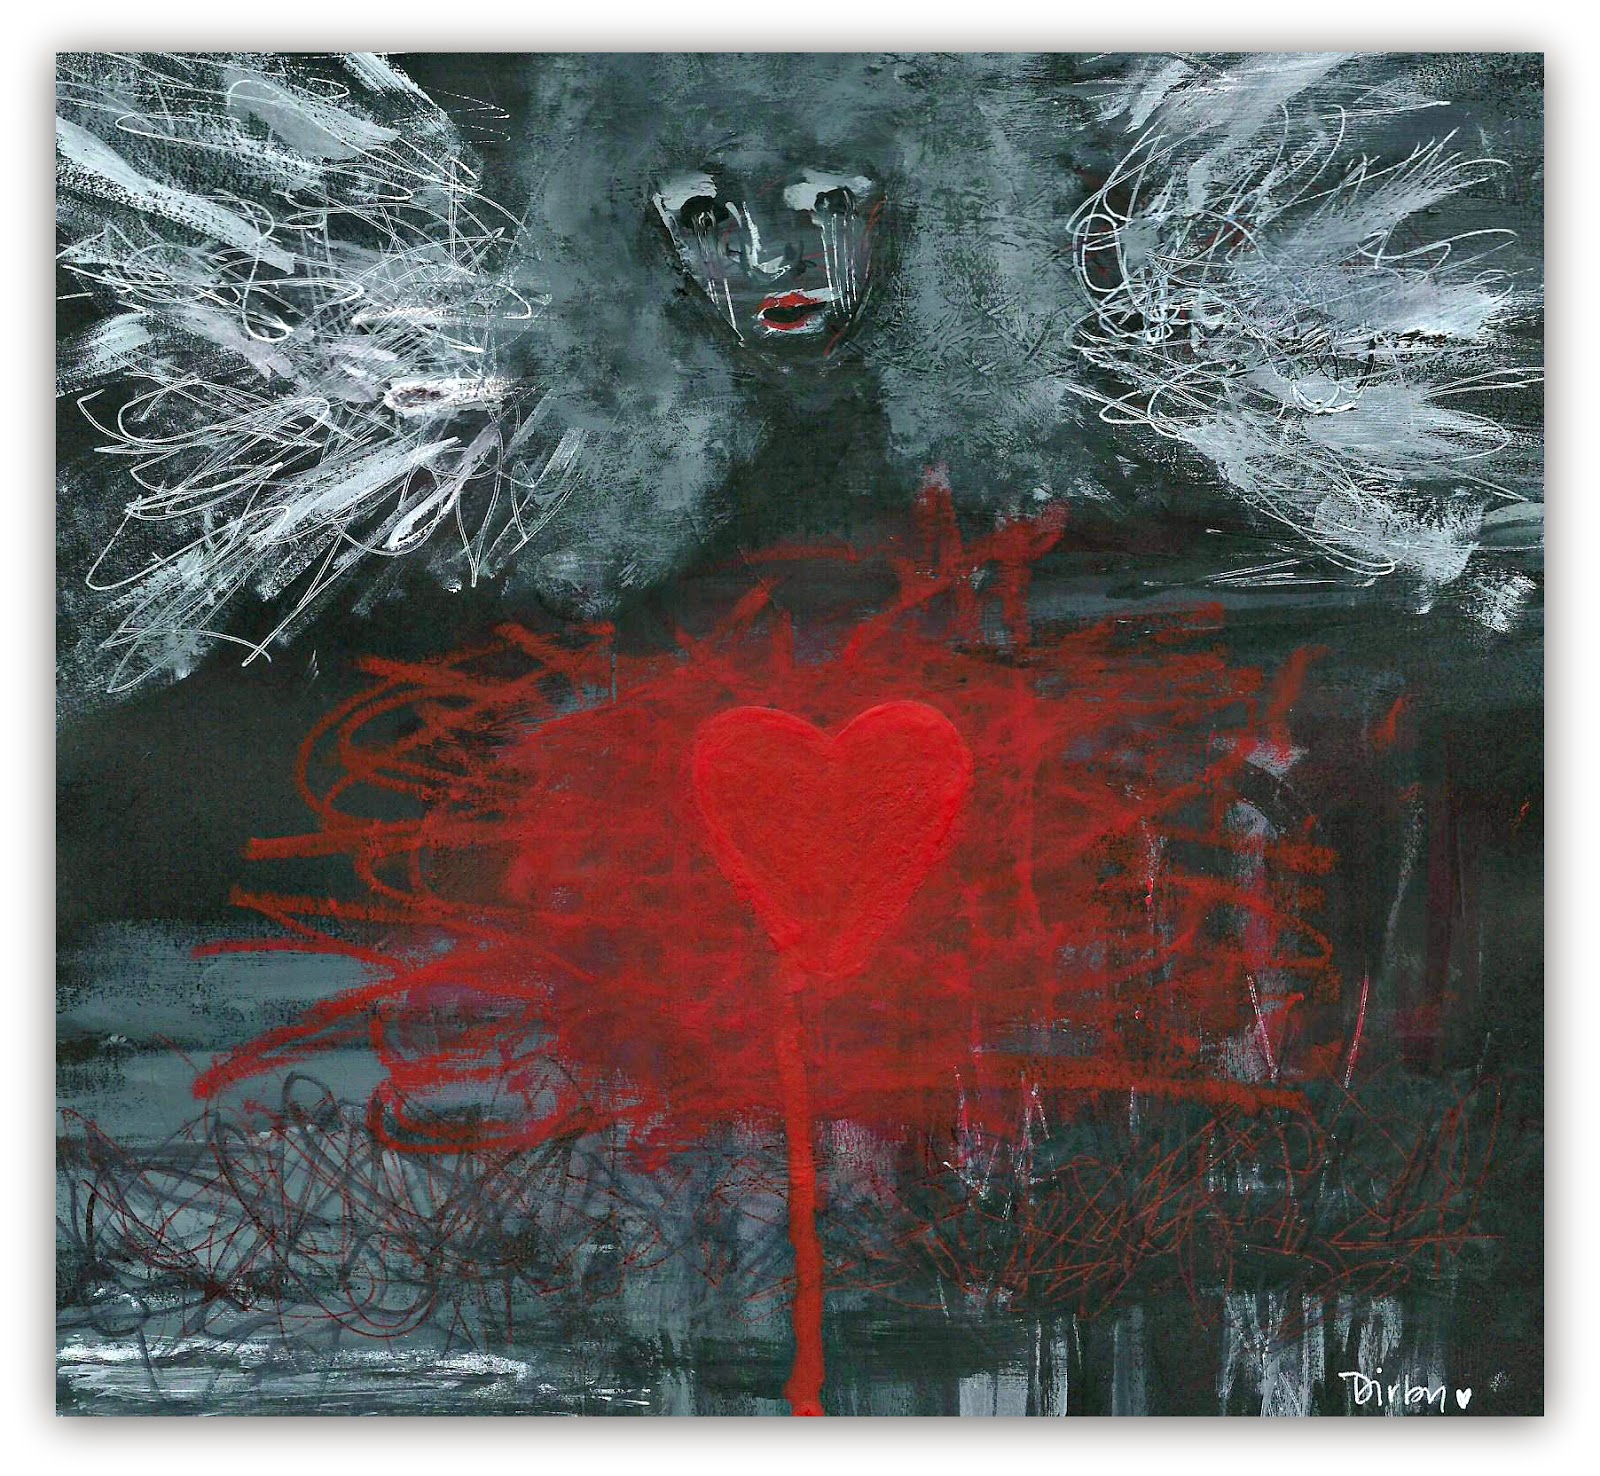 https://www.etsy.com/listing/184237728/original-painting-tears-such-as-angels